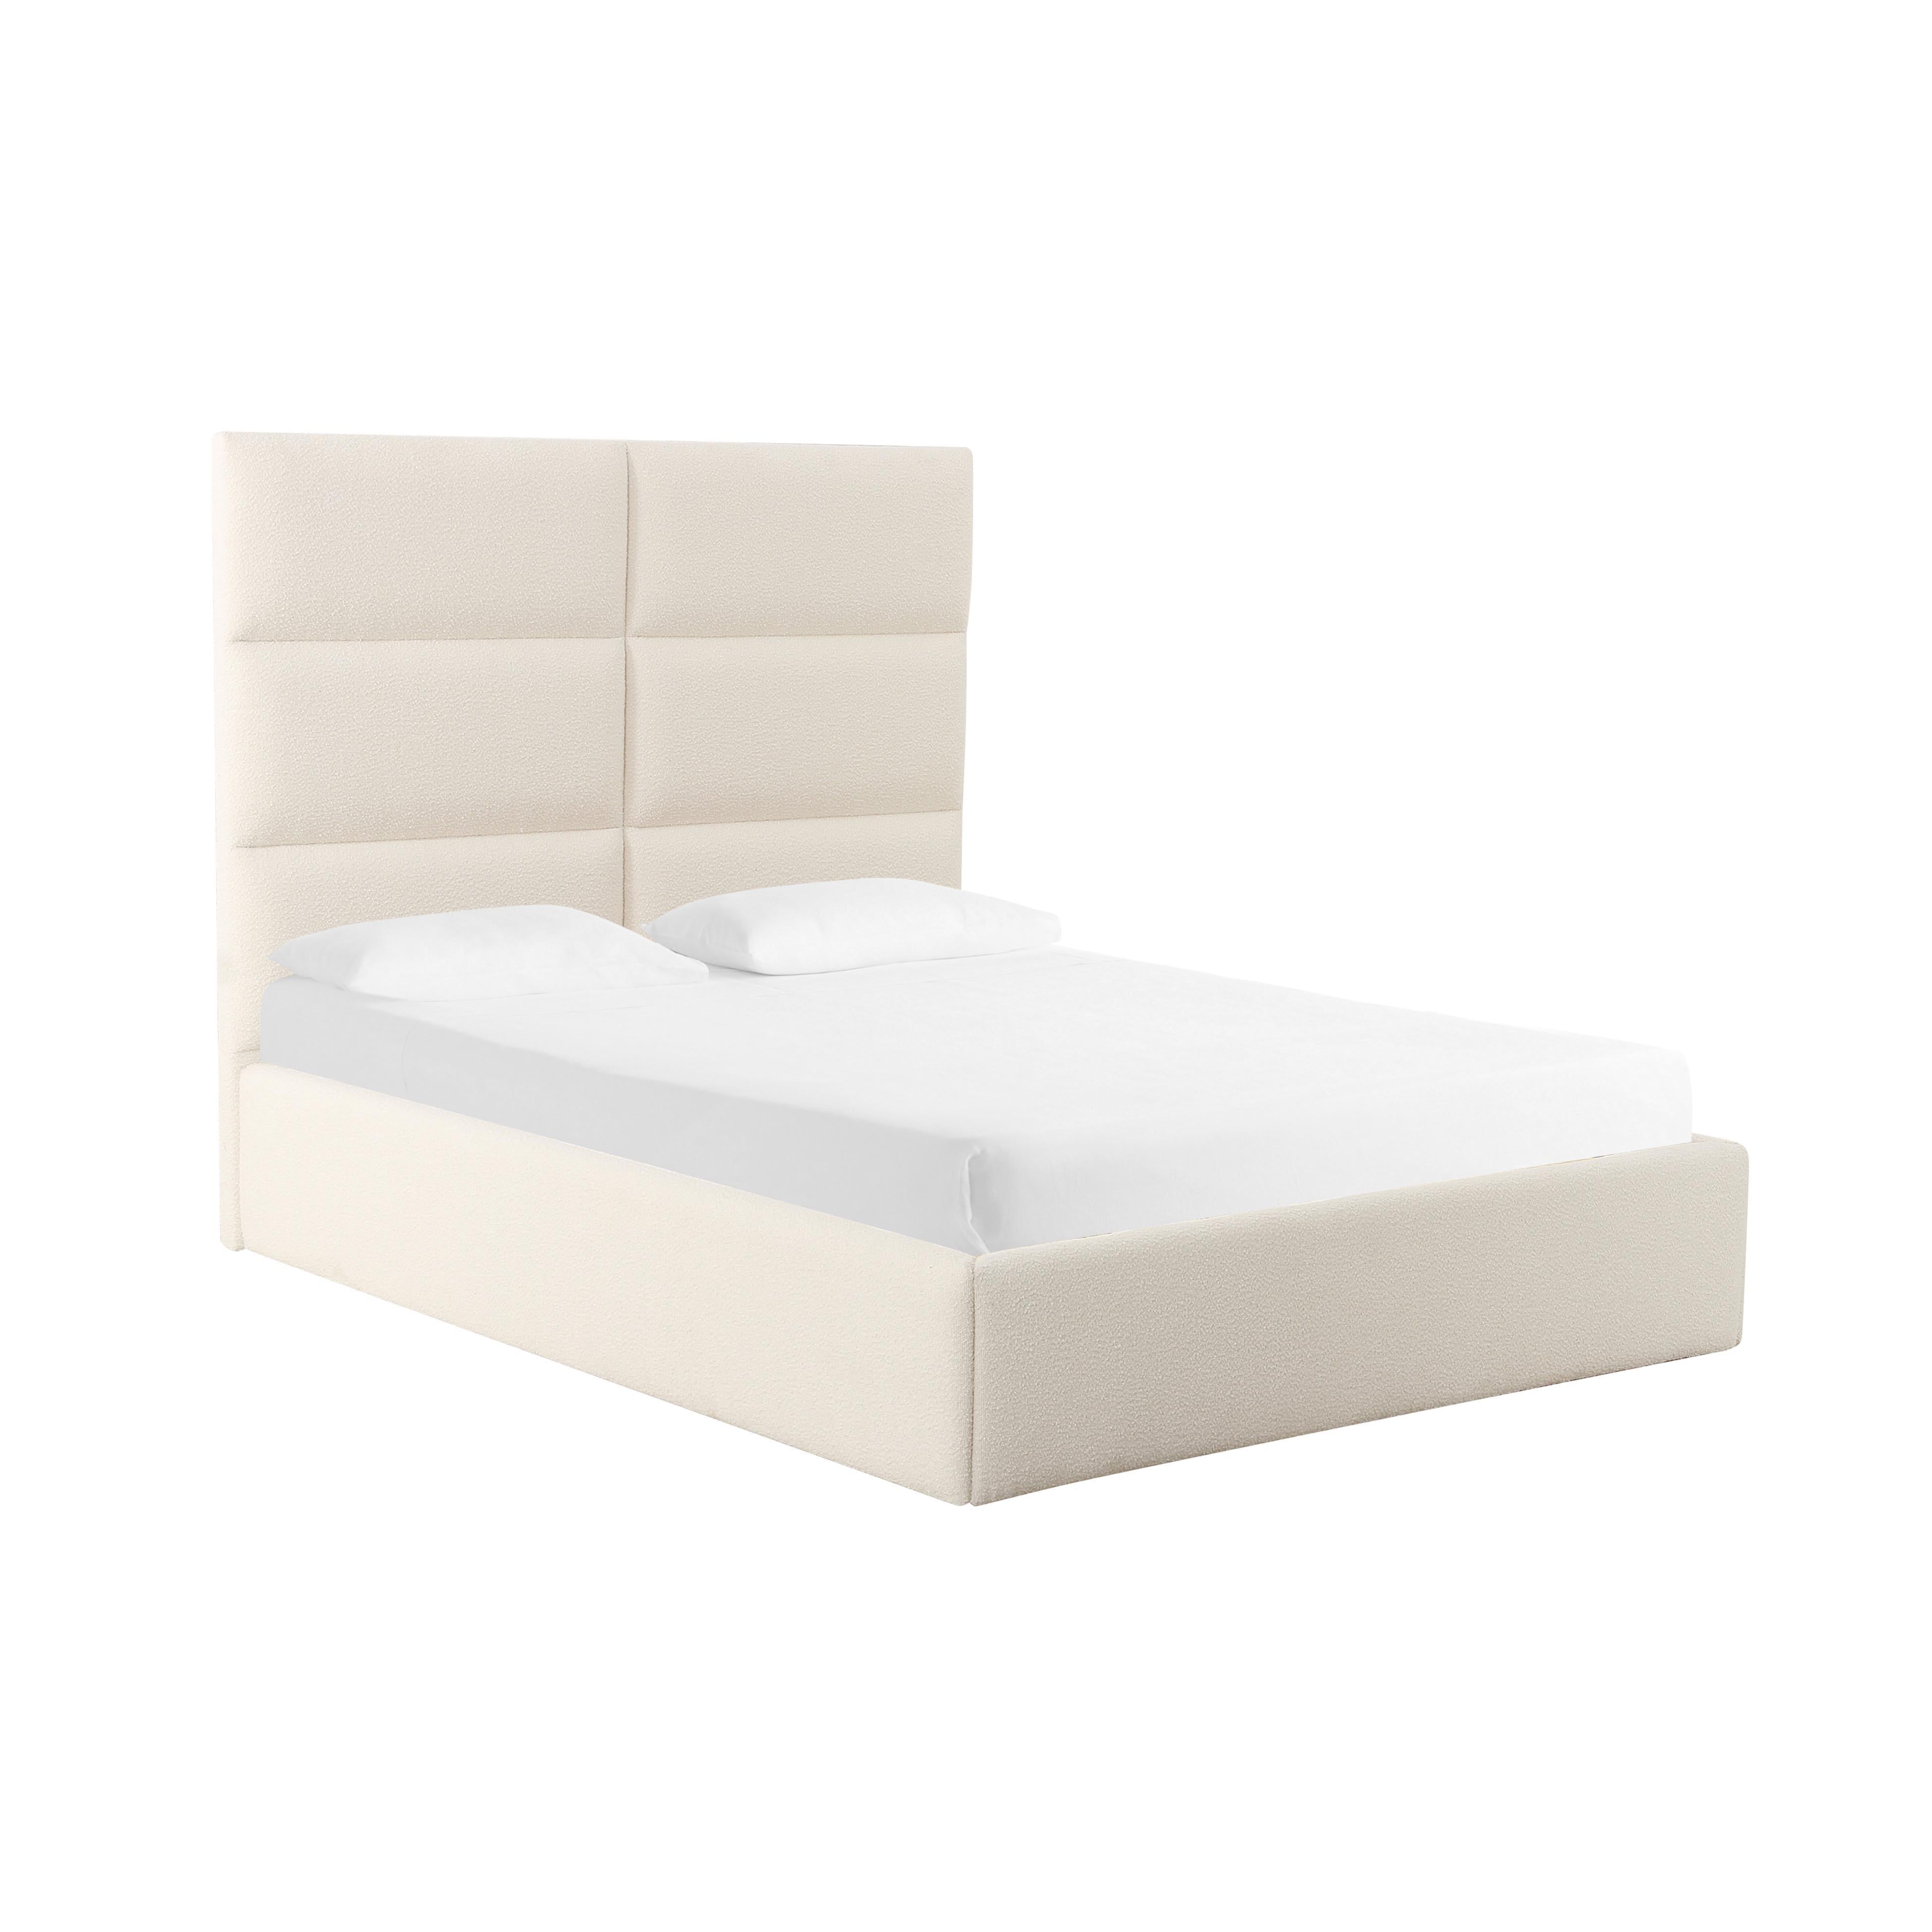 Tov Furniture Beds - Eliana Cream Boucle King Bed